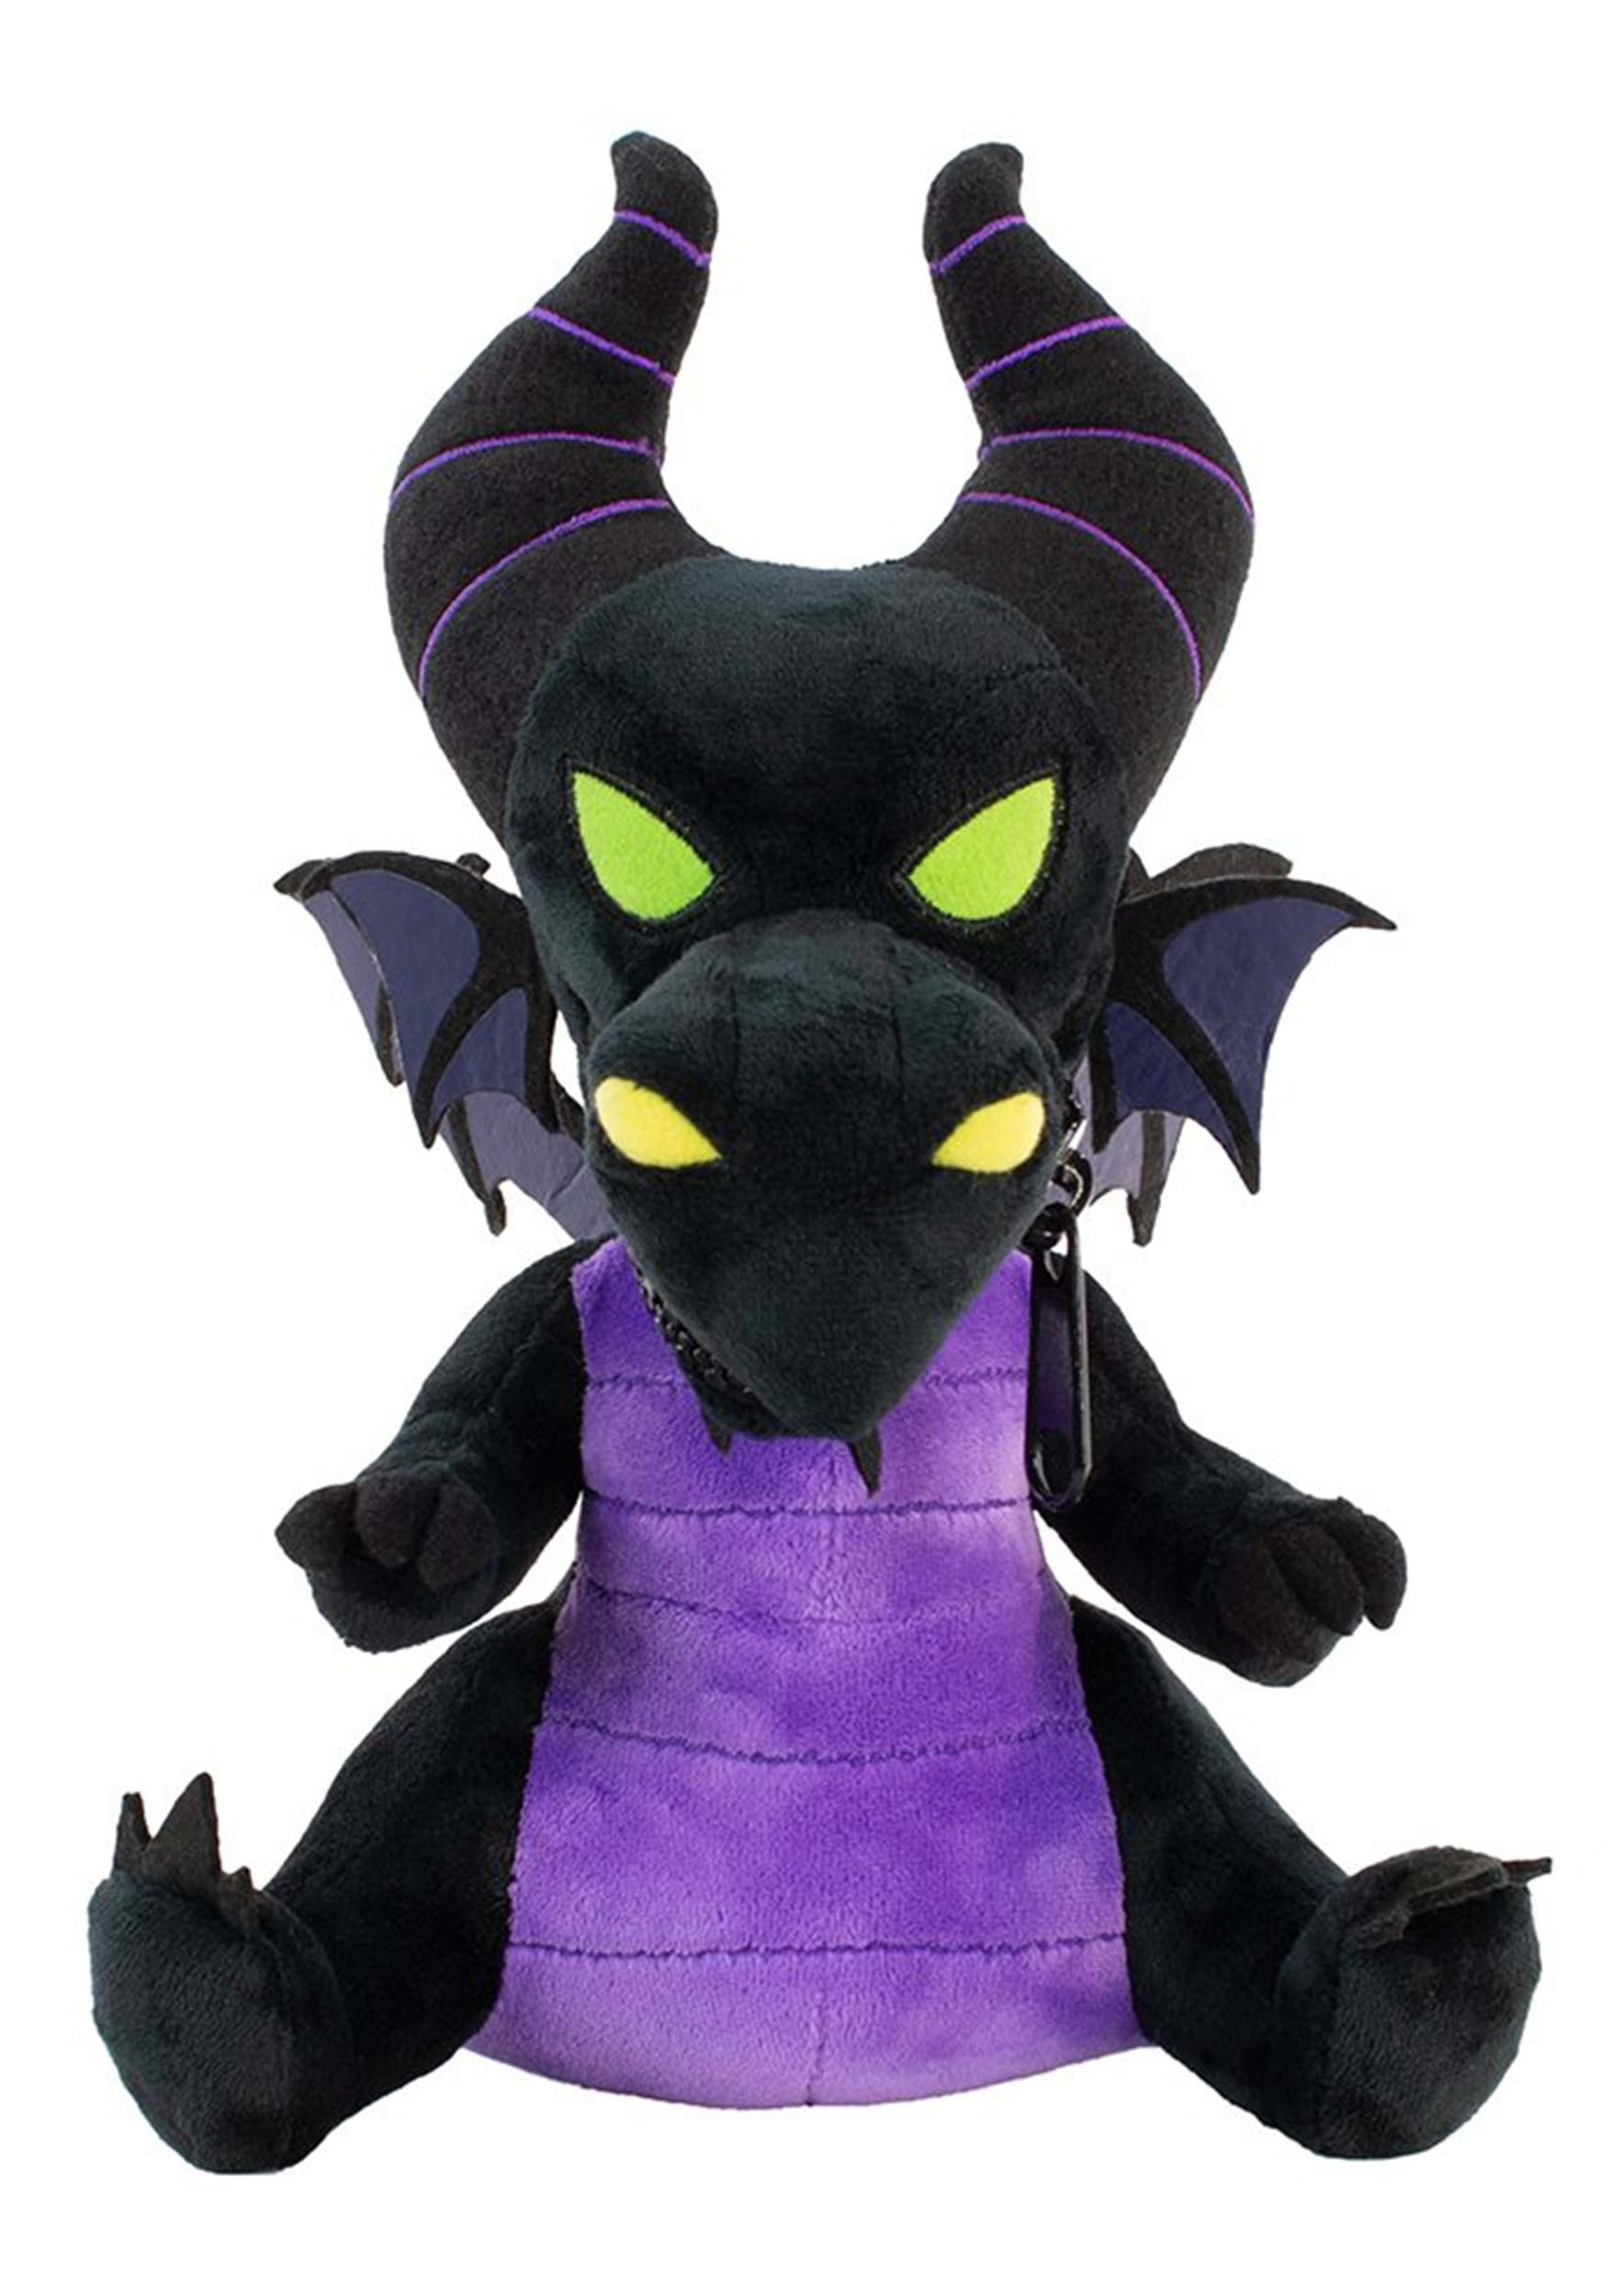 Pop by Loungefly Disney Maleficent Dragon Cosplay Backpack